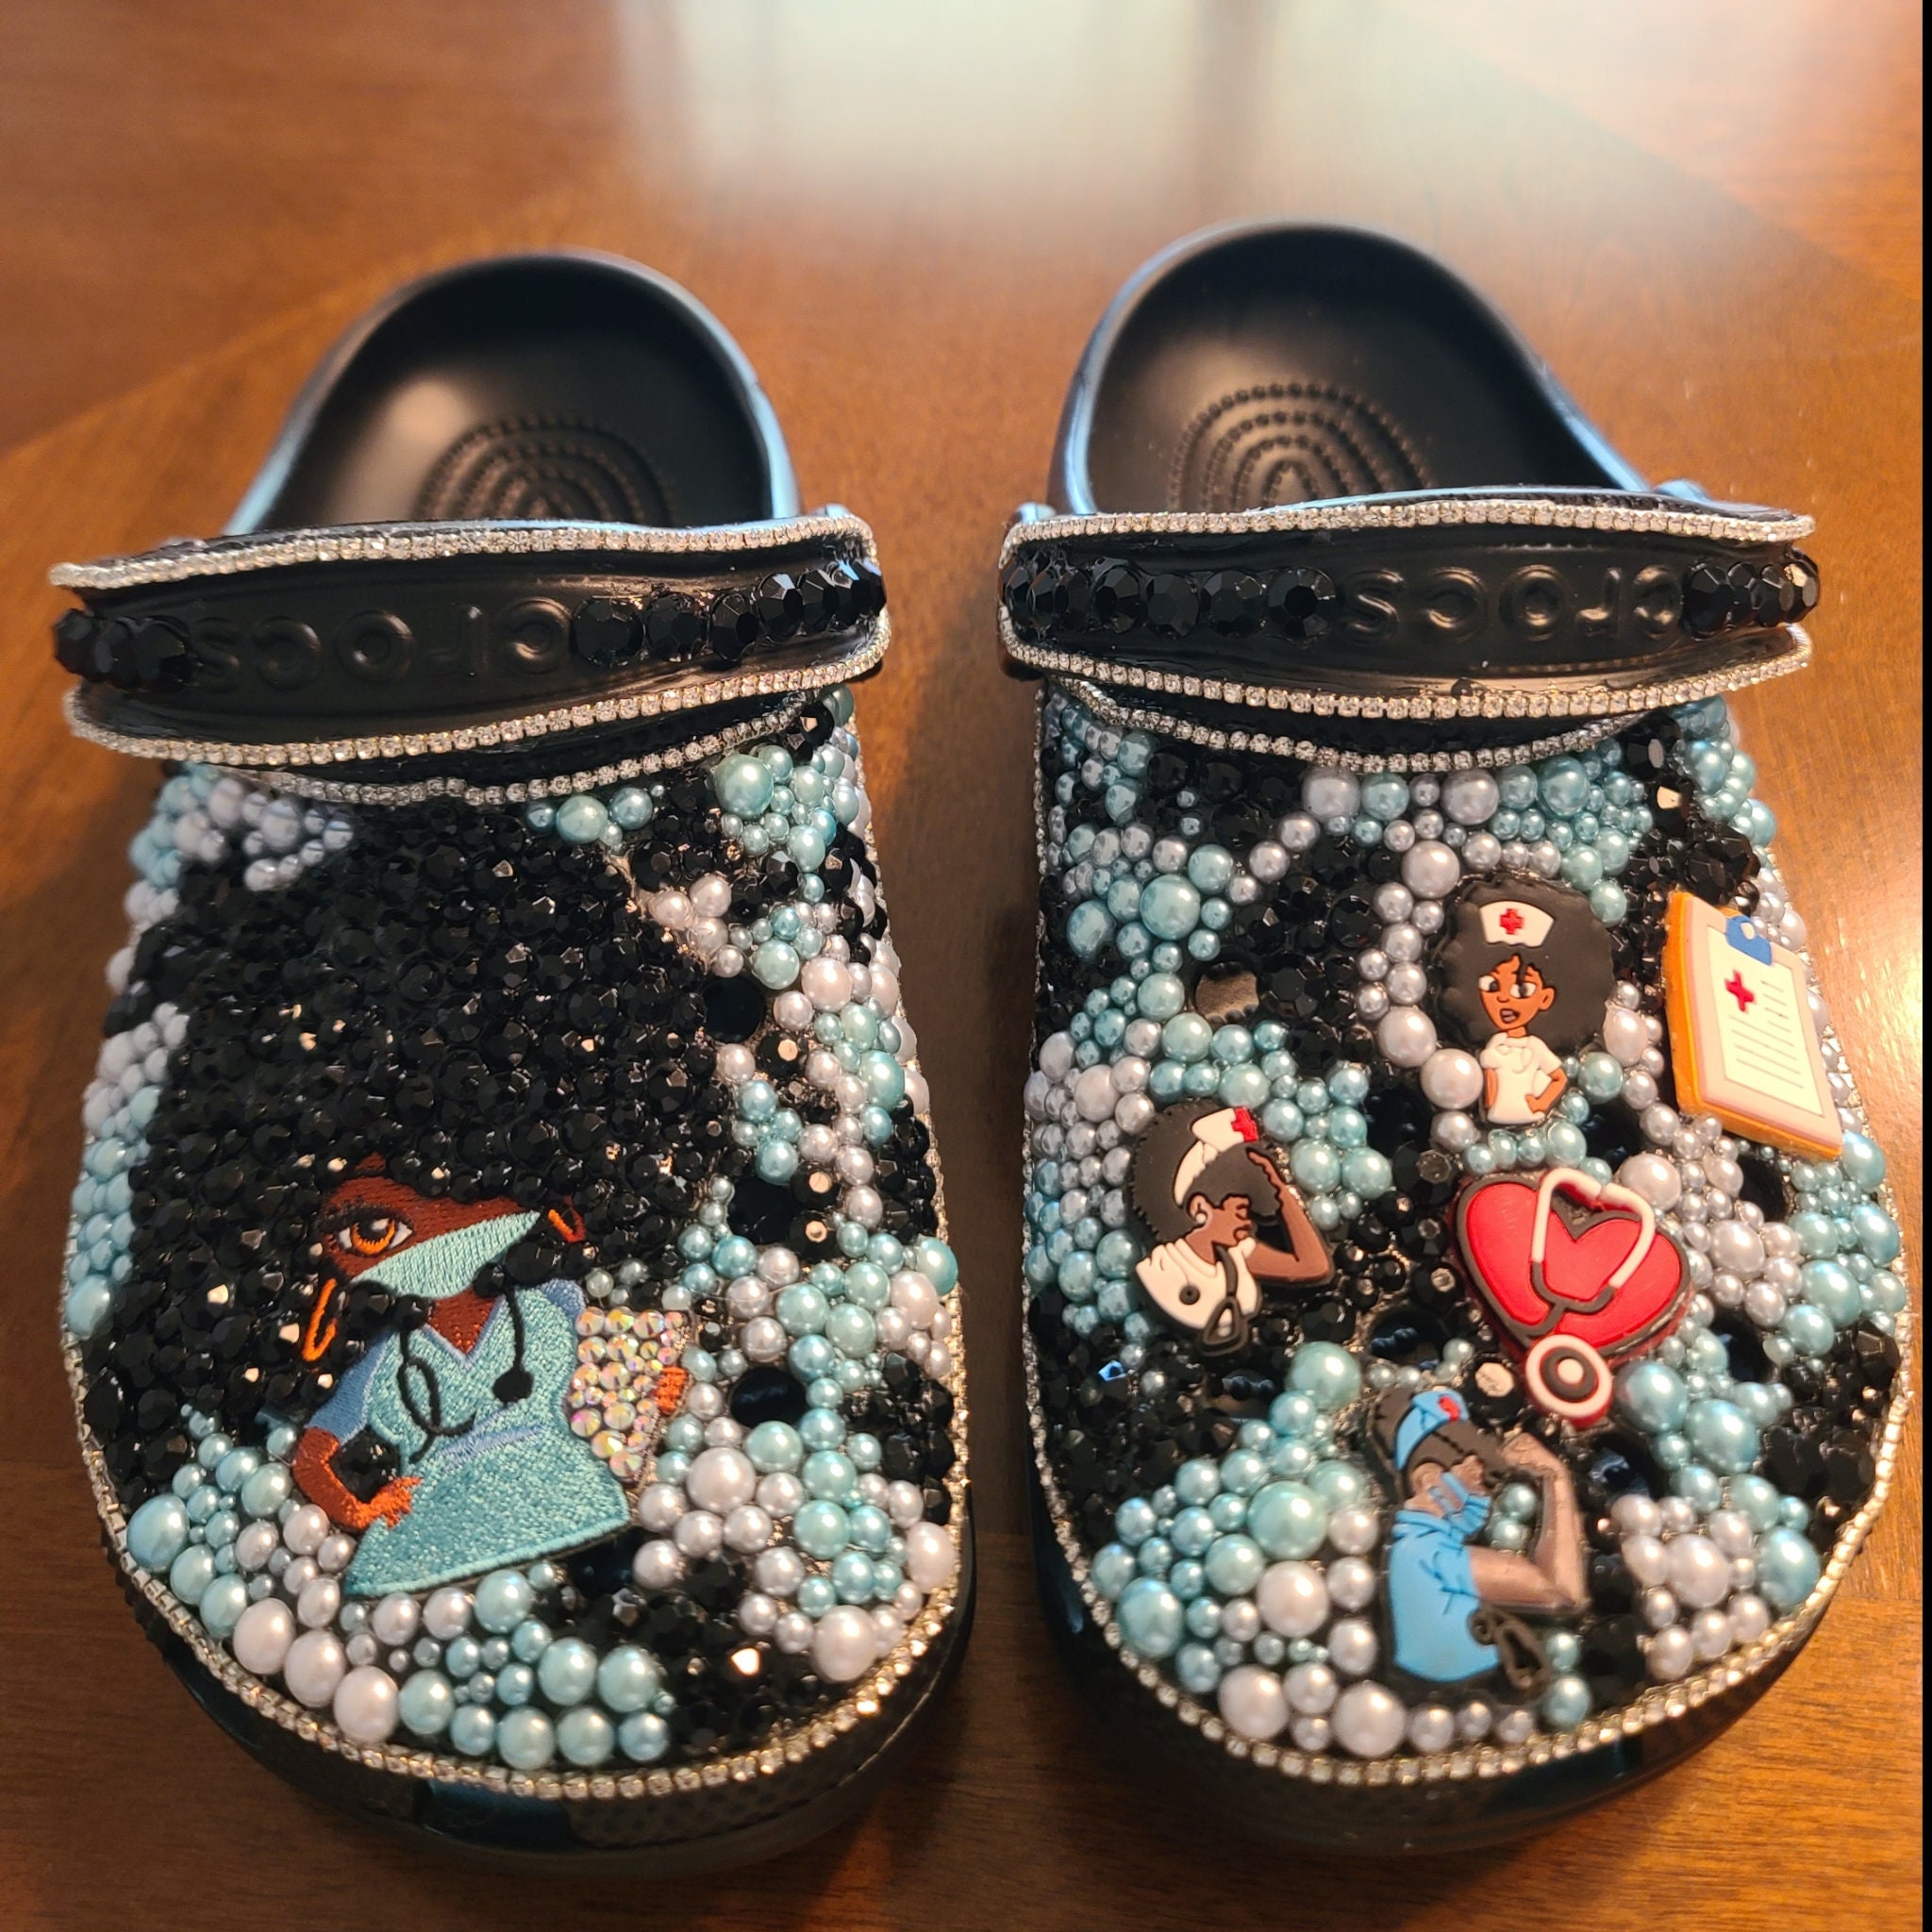 HOW TO BLING YOUR OWN CROCS- NURSE/ STNA MEDICAL FIELD THEMED SHOE CHARMS-  GLAM WORK CROCS 